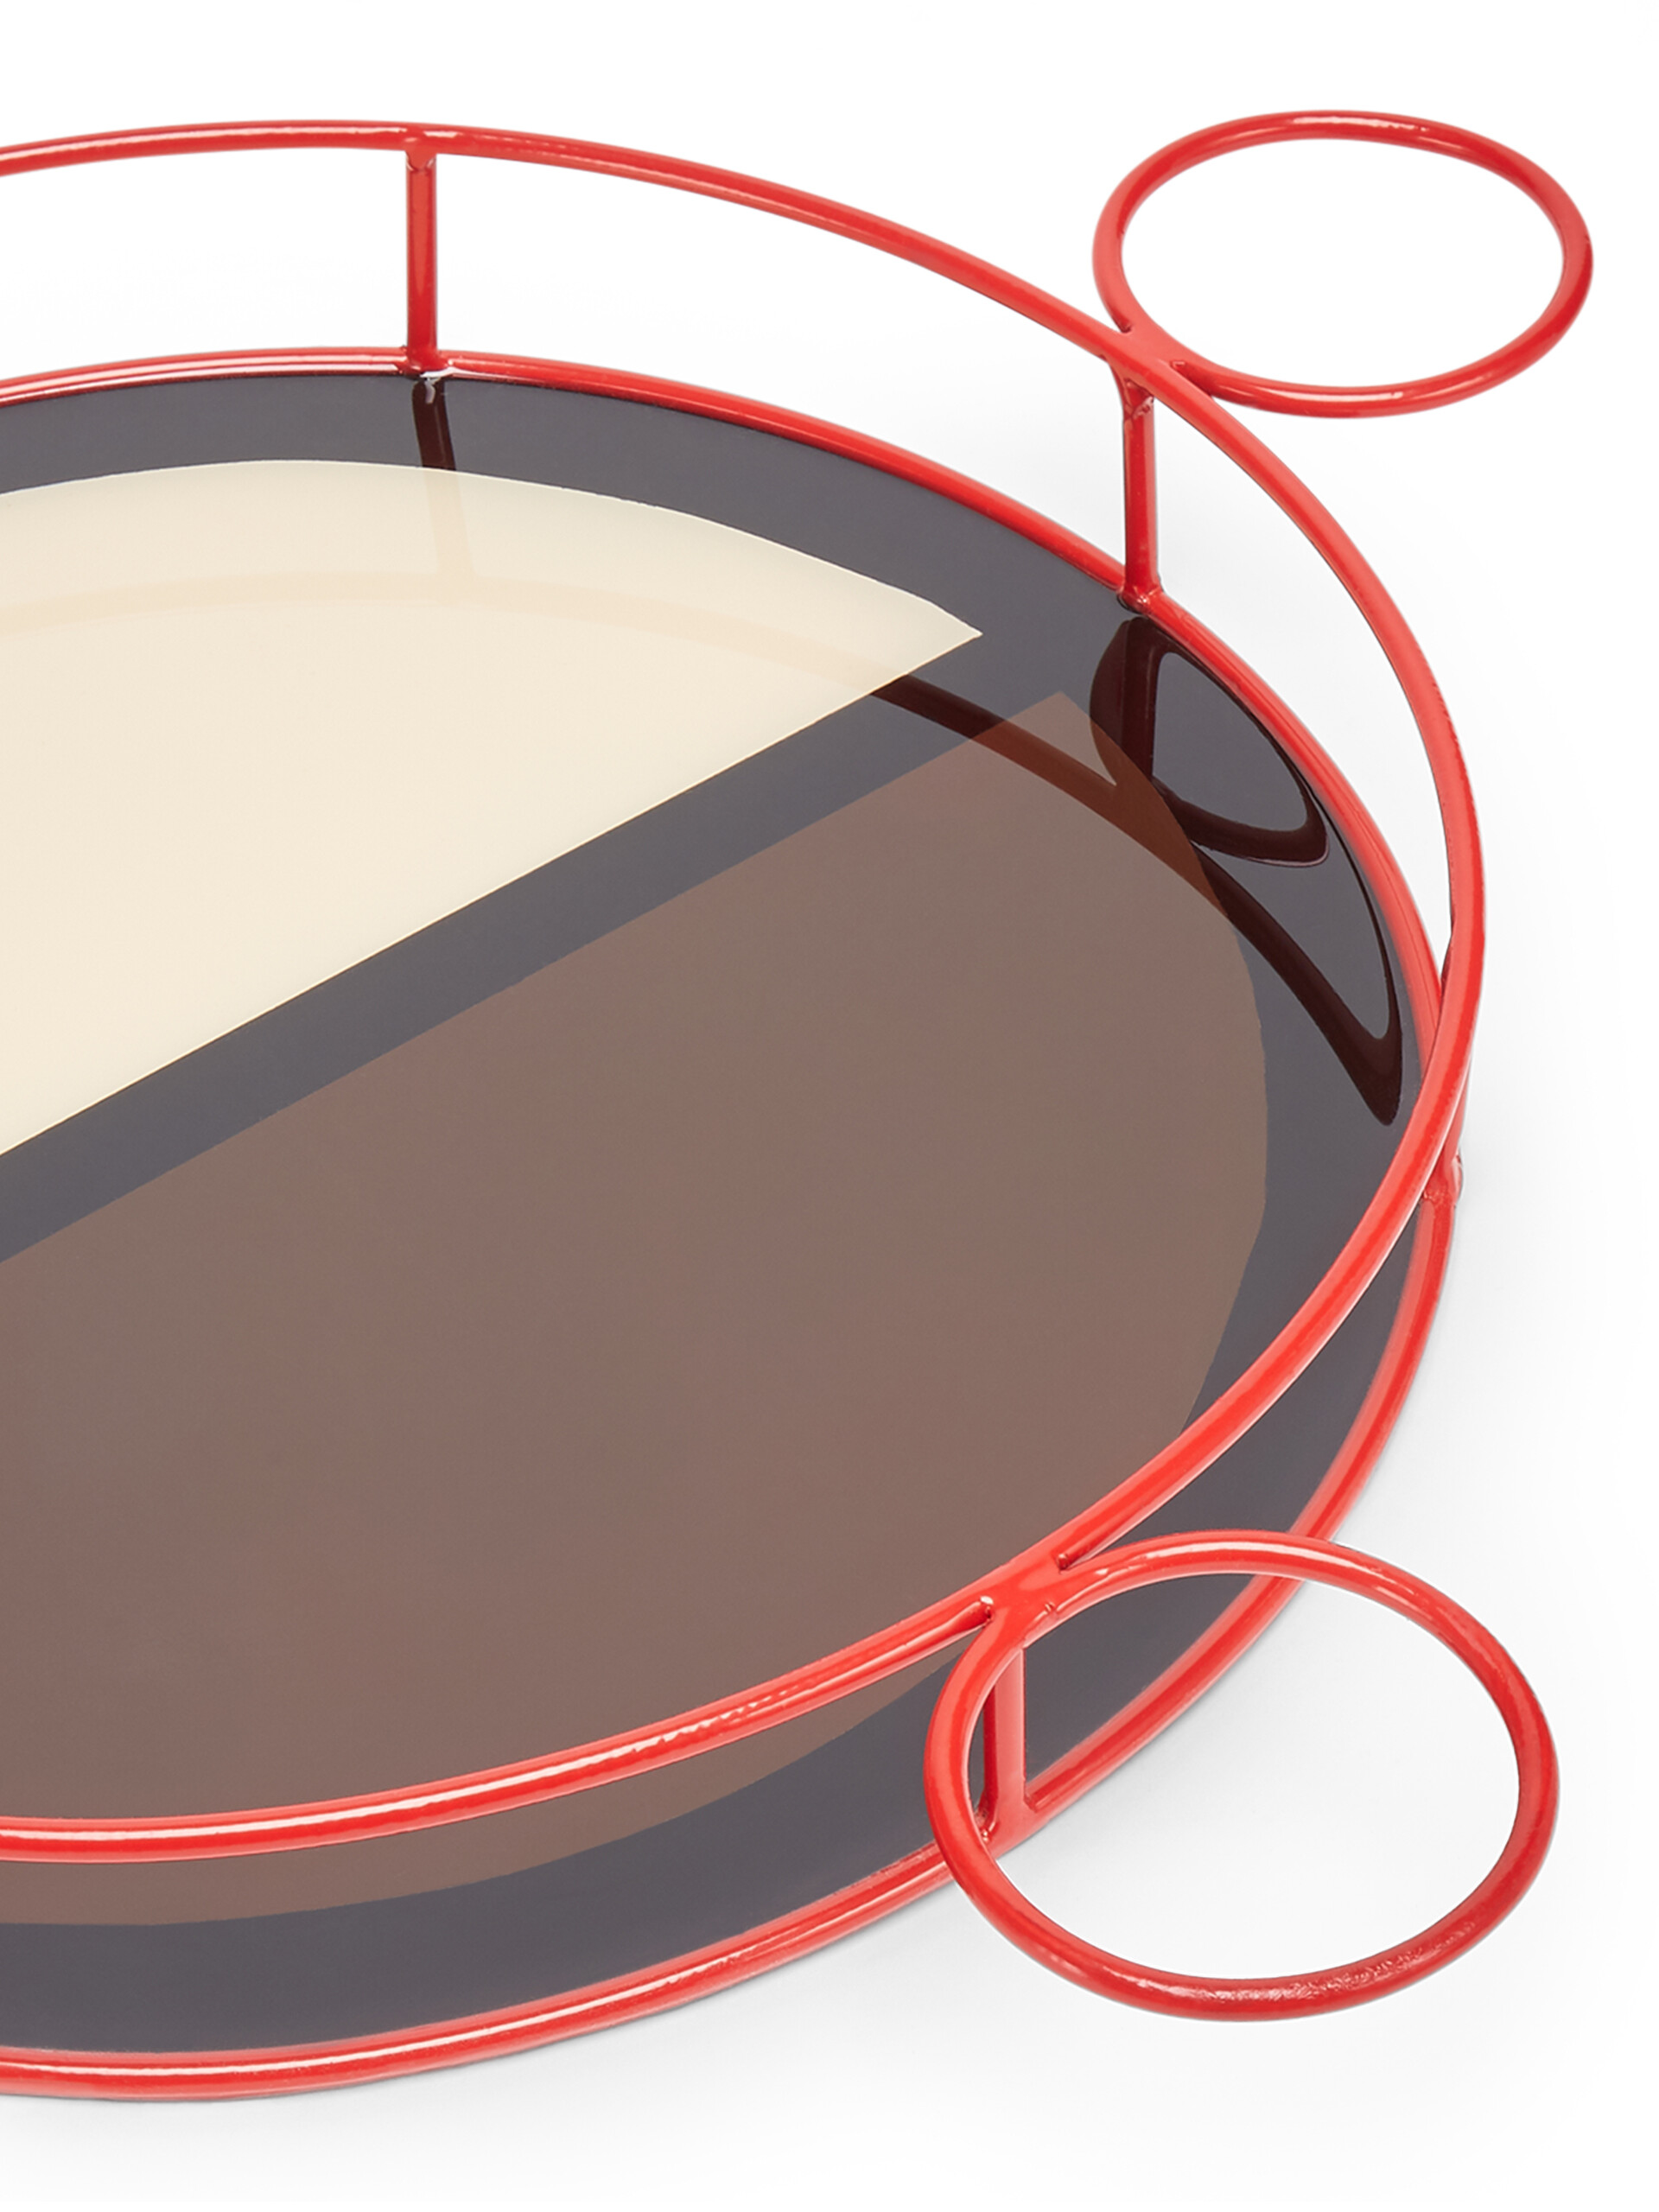 MARNI MARKET round tray in iron and beige, brown and black resin - Accessories - Image 3